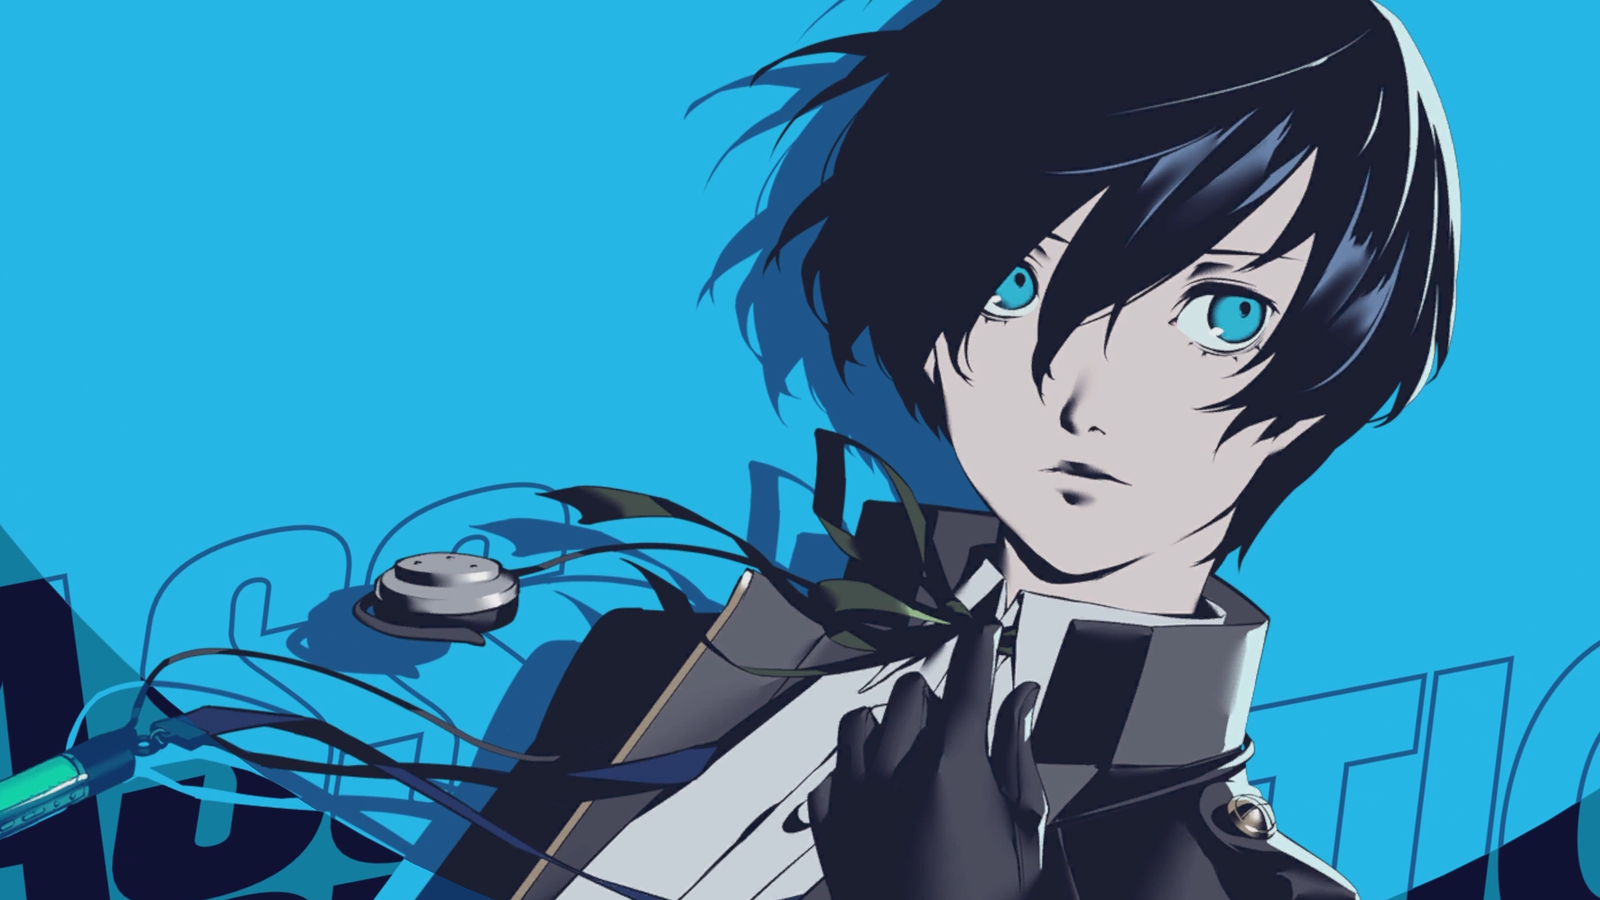 The Persona 3 remake Reload should worry fans - Polygon